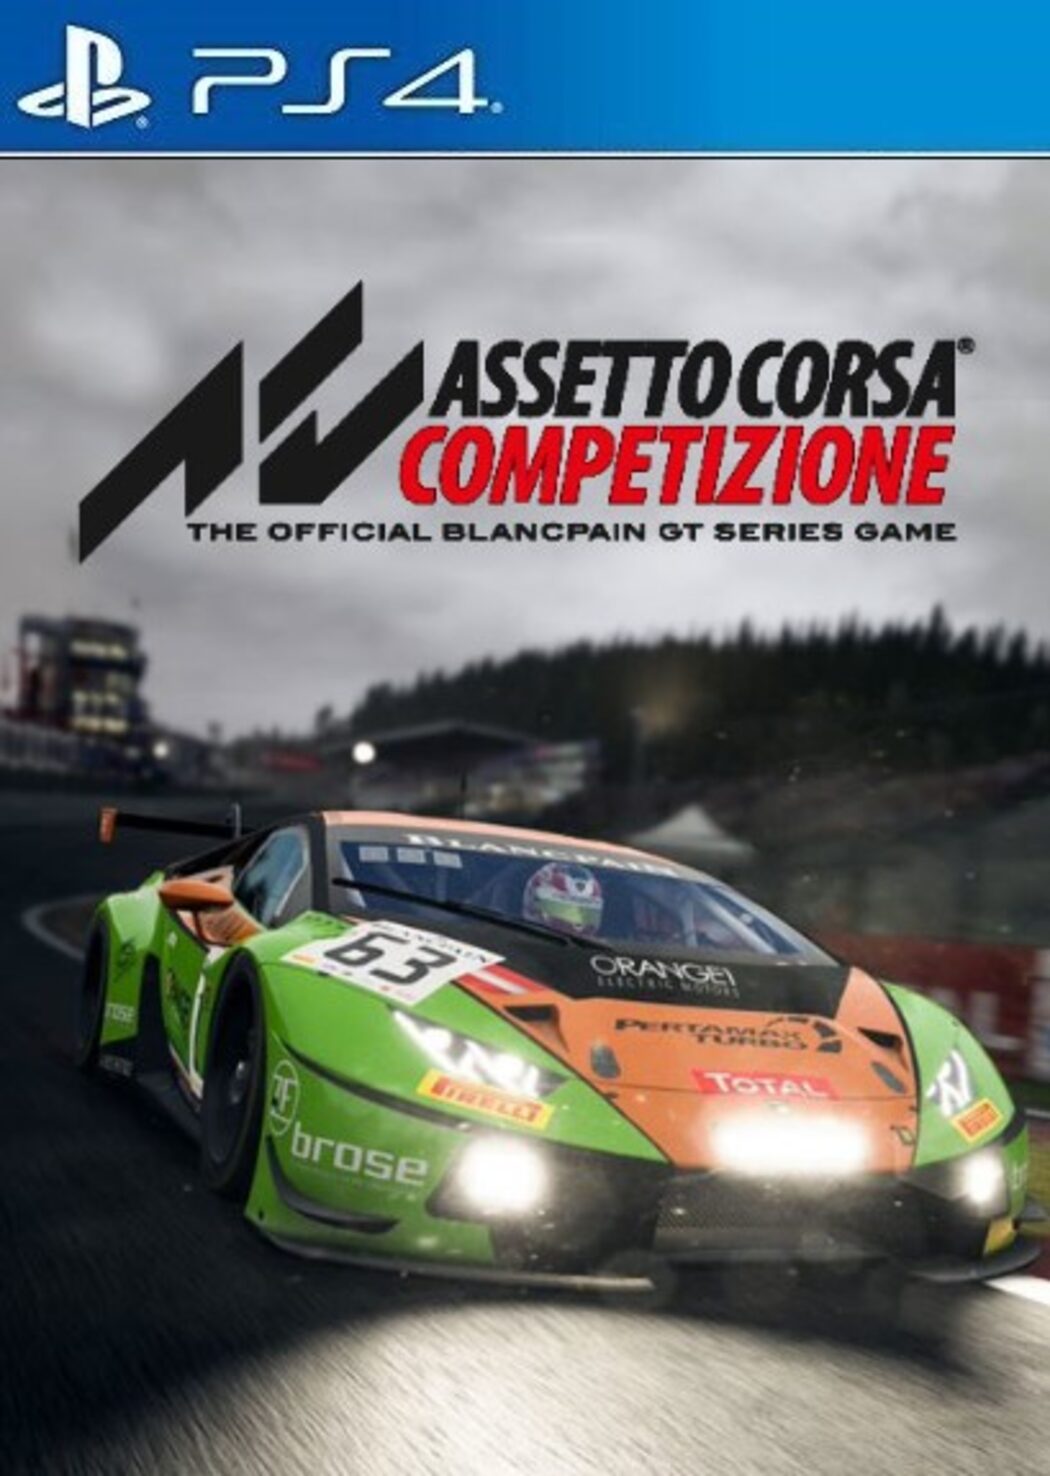 Buy Assetto Corsa for PS4